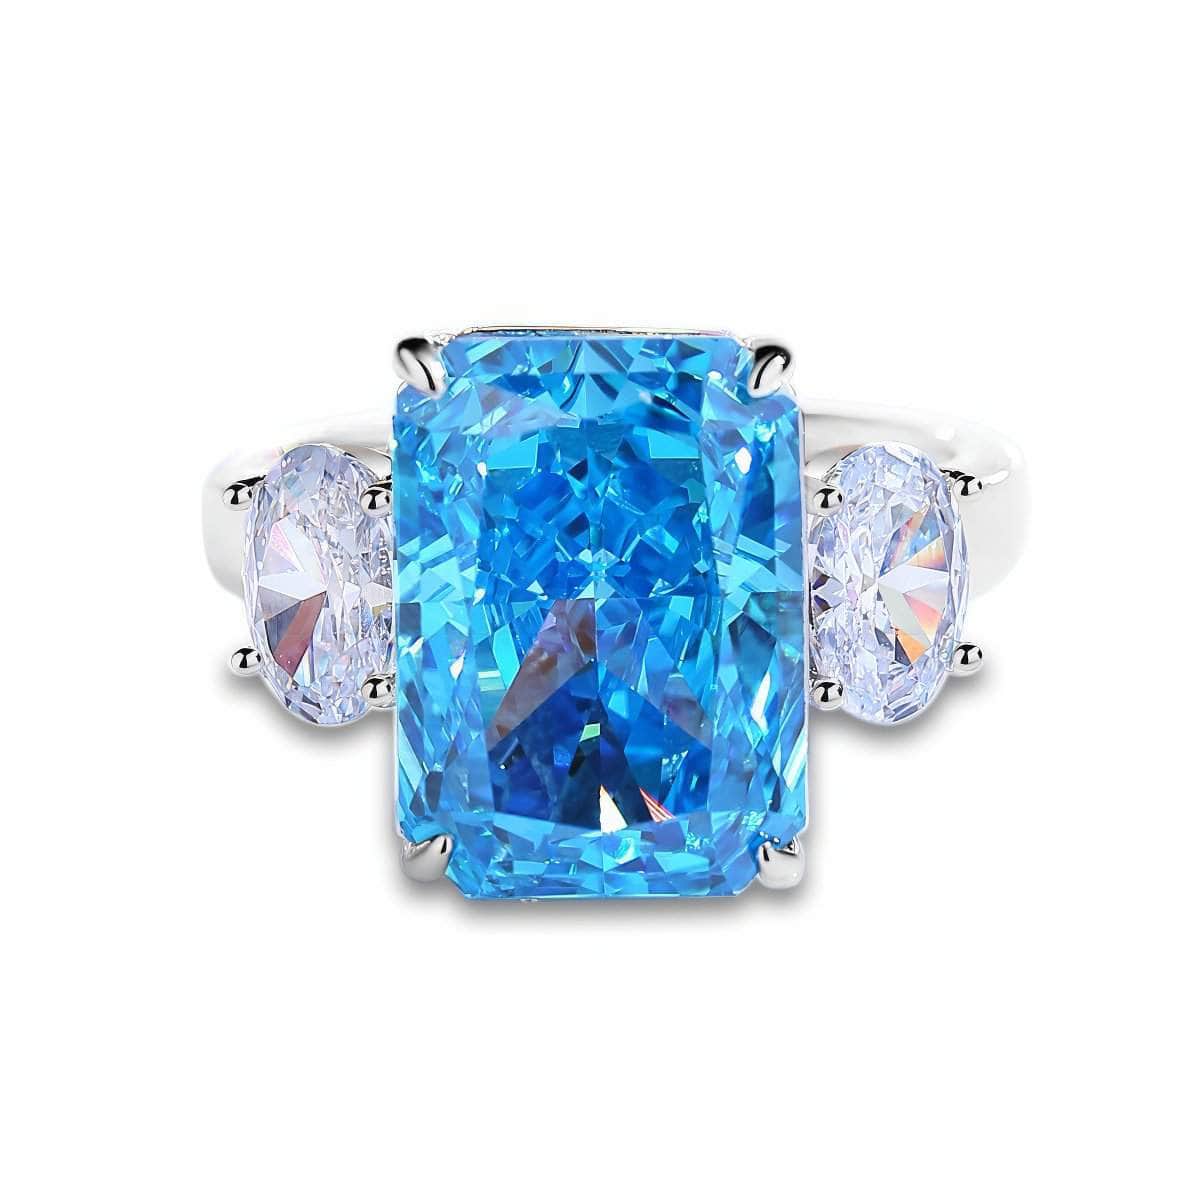 Sterling Silver Cushion Radiant Cut Paved Crystal Ring 6 US / SeaBlue